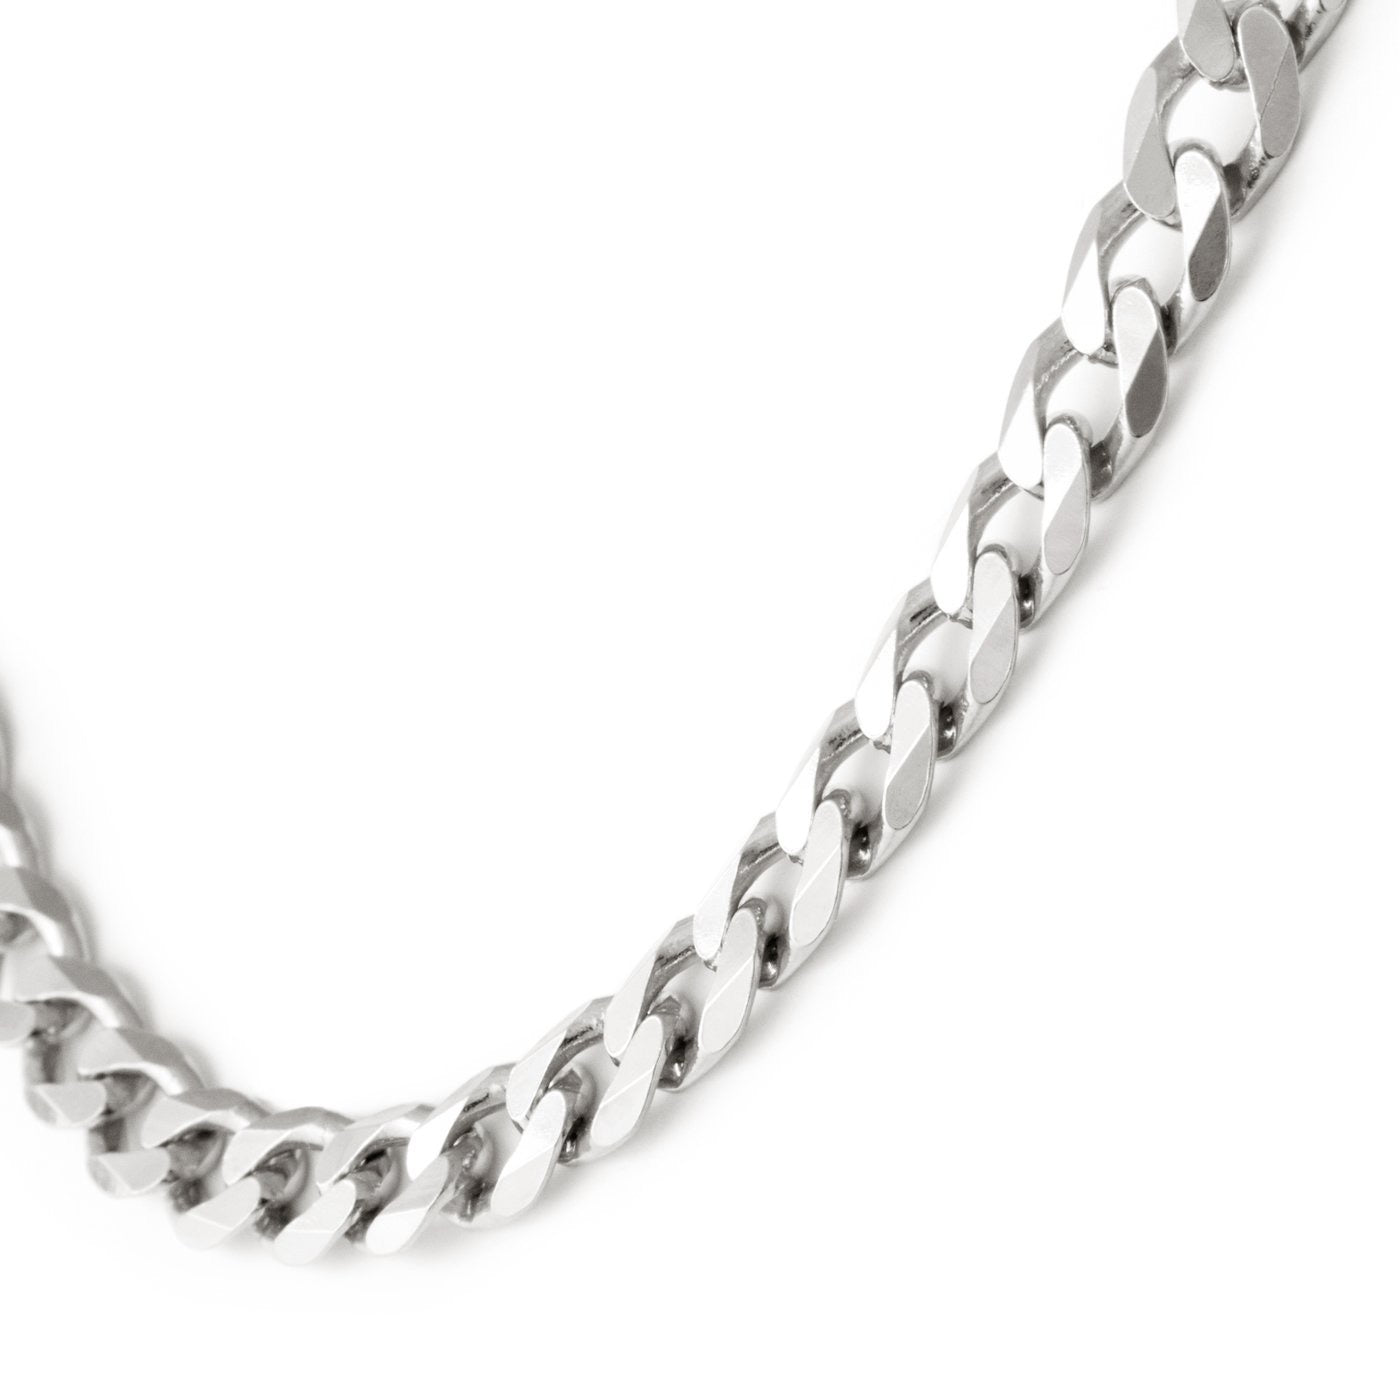 BOLD CURB NECKLACE IN SILVER